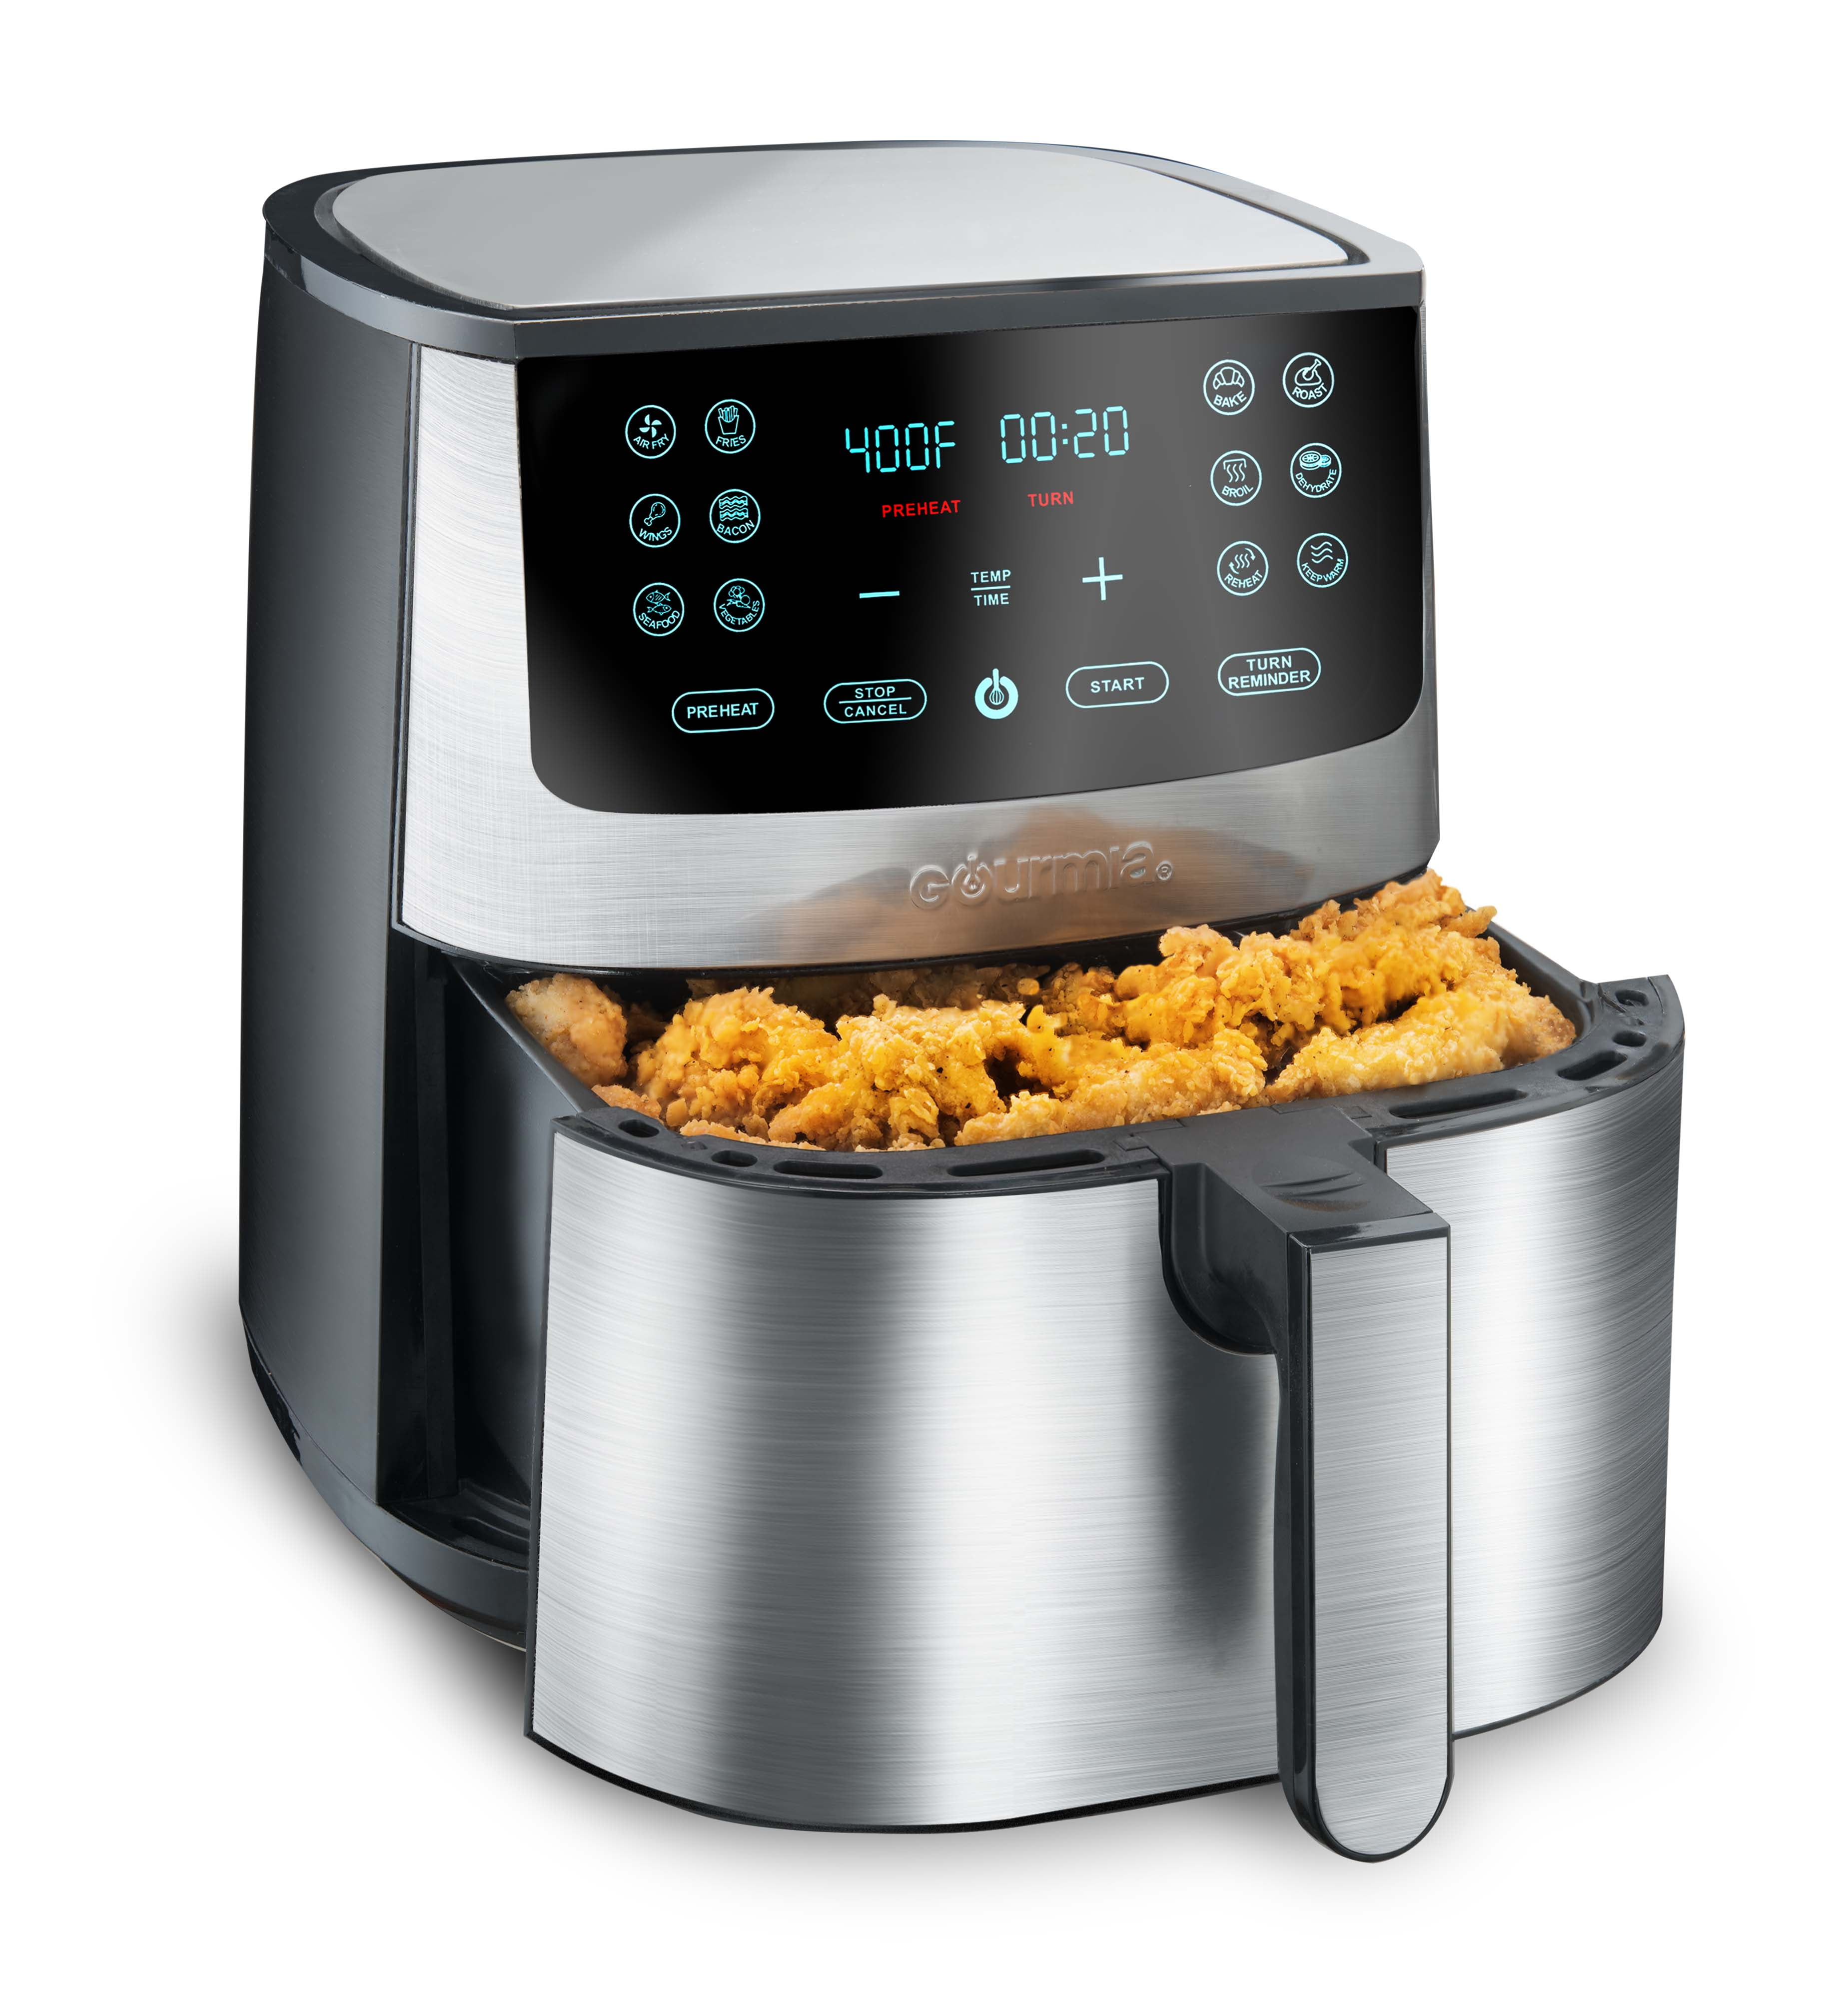 Gourmia 8 Qt Digital Air Fryer with FryForce 360 and Guided Cooking,  Black/Stainless Steel, GAF826, 14.82 H, New 